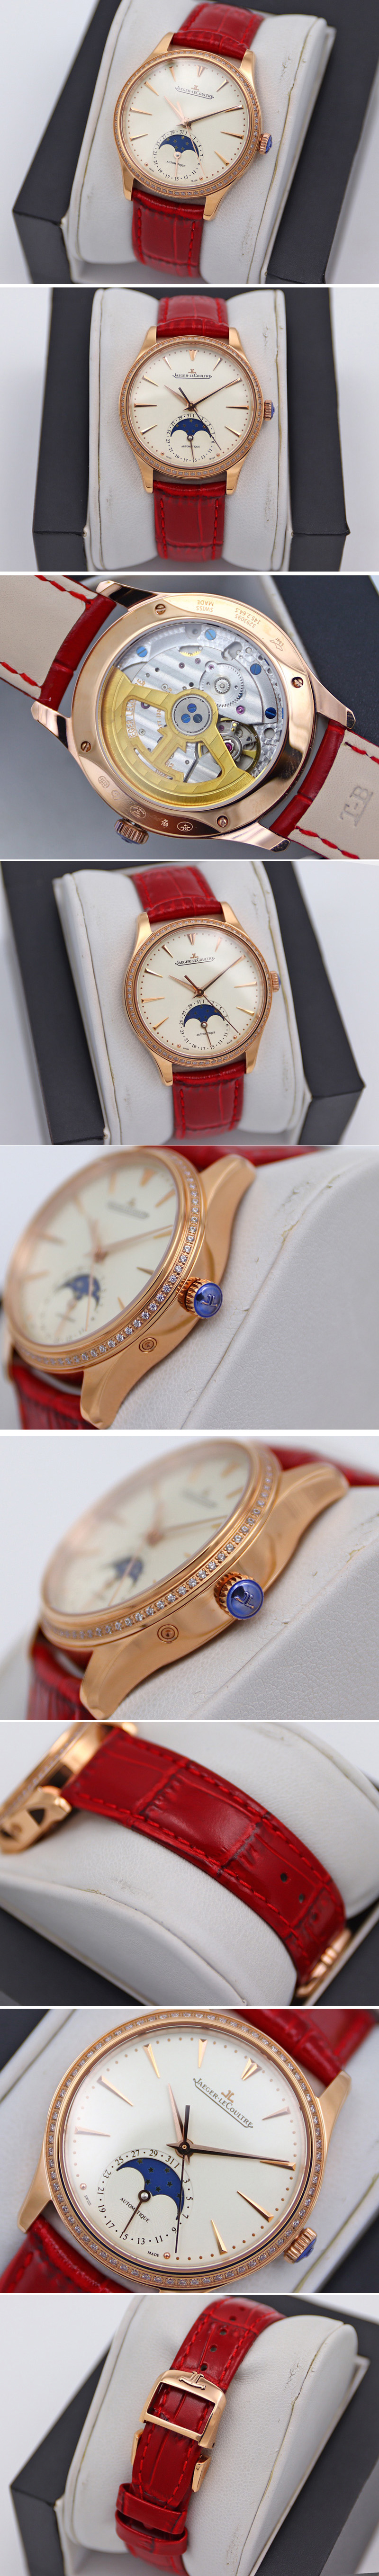 Replica Jaeger-LeCoultre Master Ultra Thin Moonphase RG/LE Diamond Bezel White Dial Red Leather Strap TW MY9015 to Cal.925